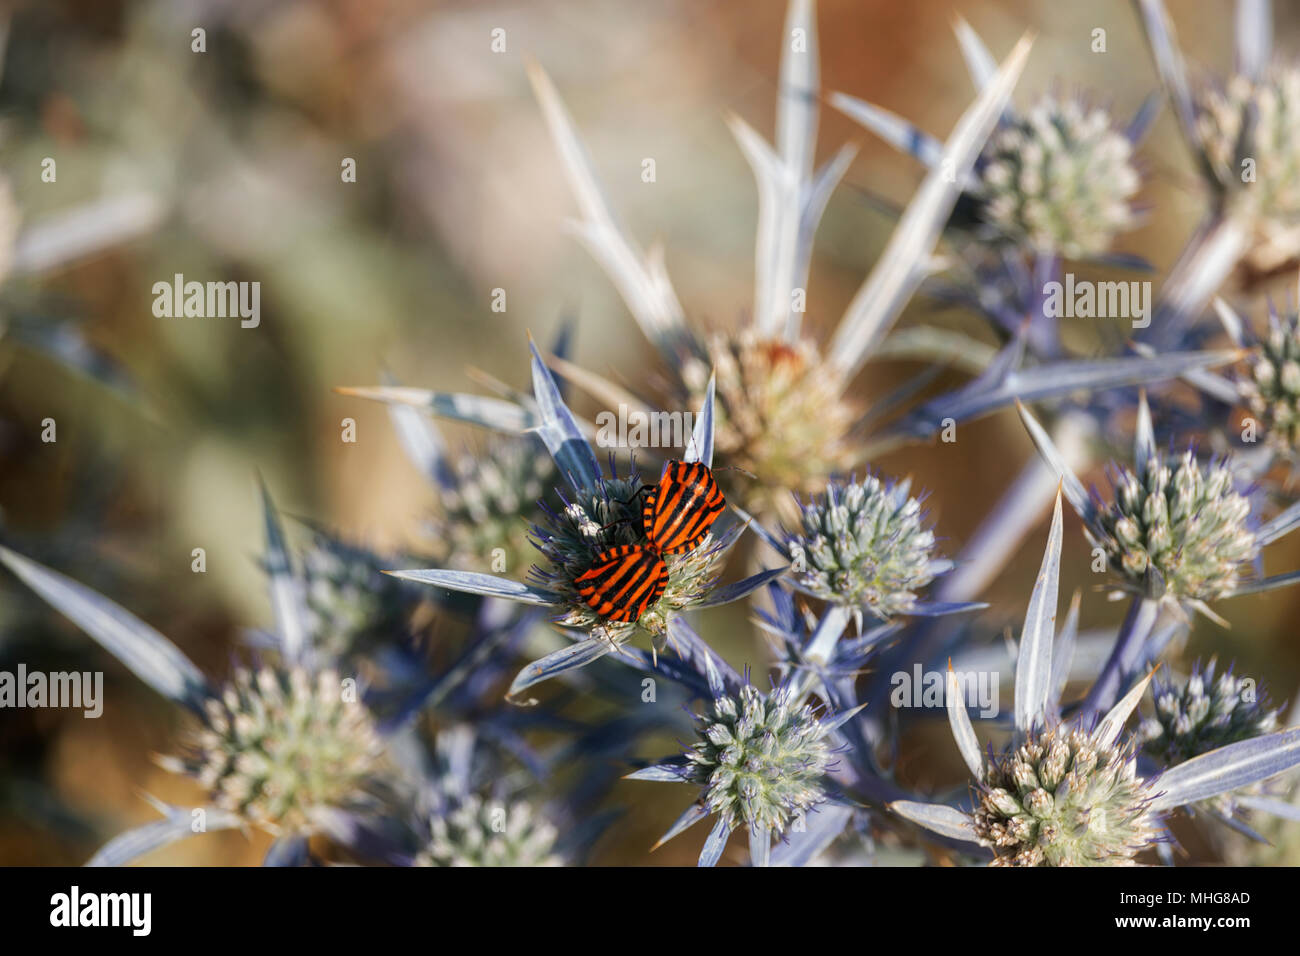 couple of graphosomas ( italian striped bug ) is resting on a eryngiun flower (sea holly ).Black longitudinal stripes stand out against a blue flower Stock Photo